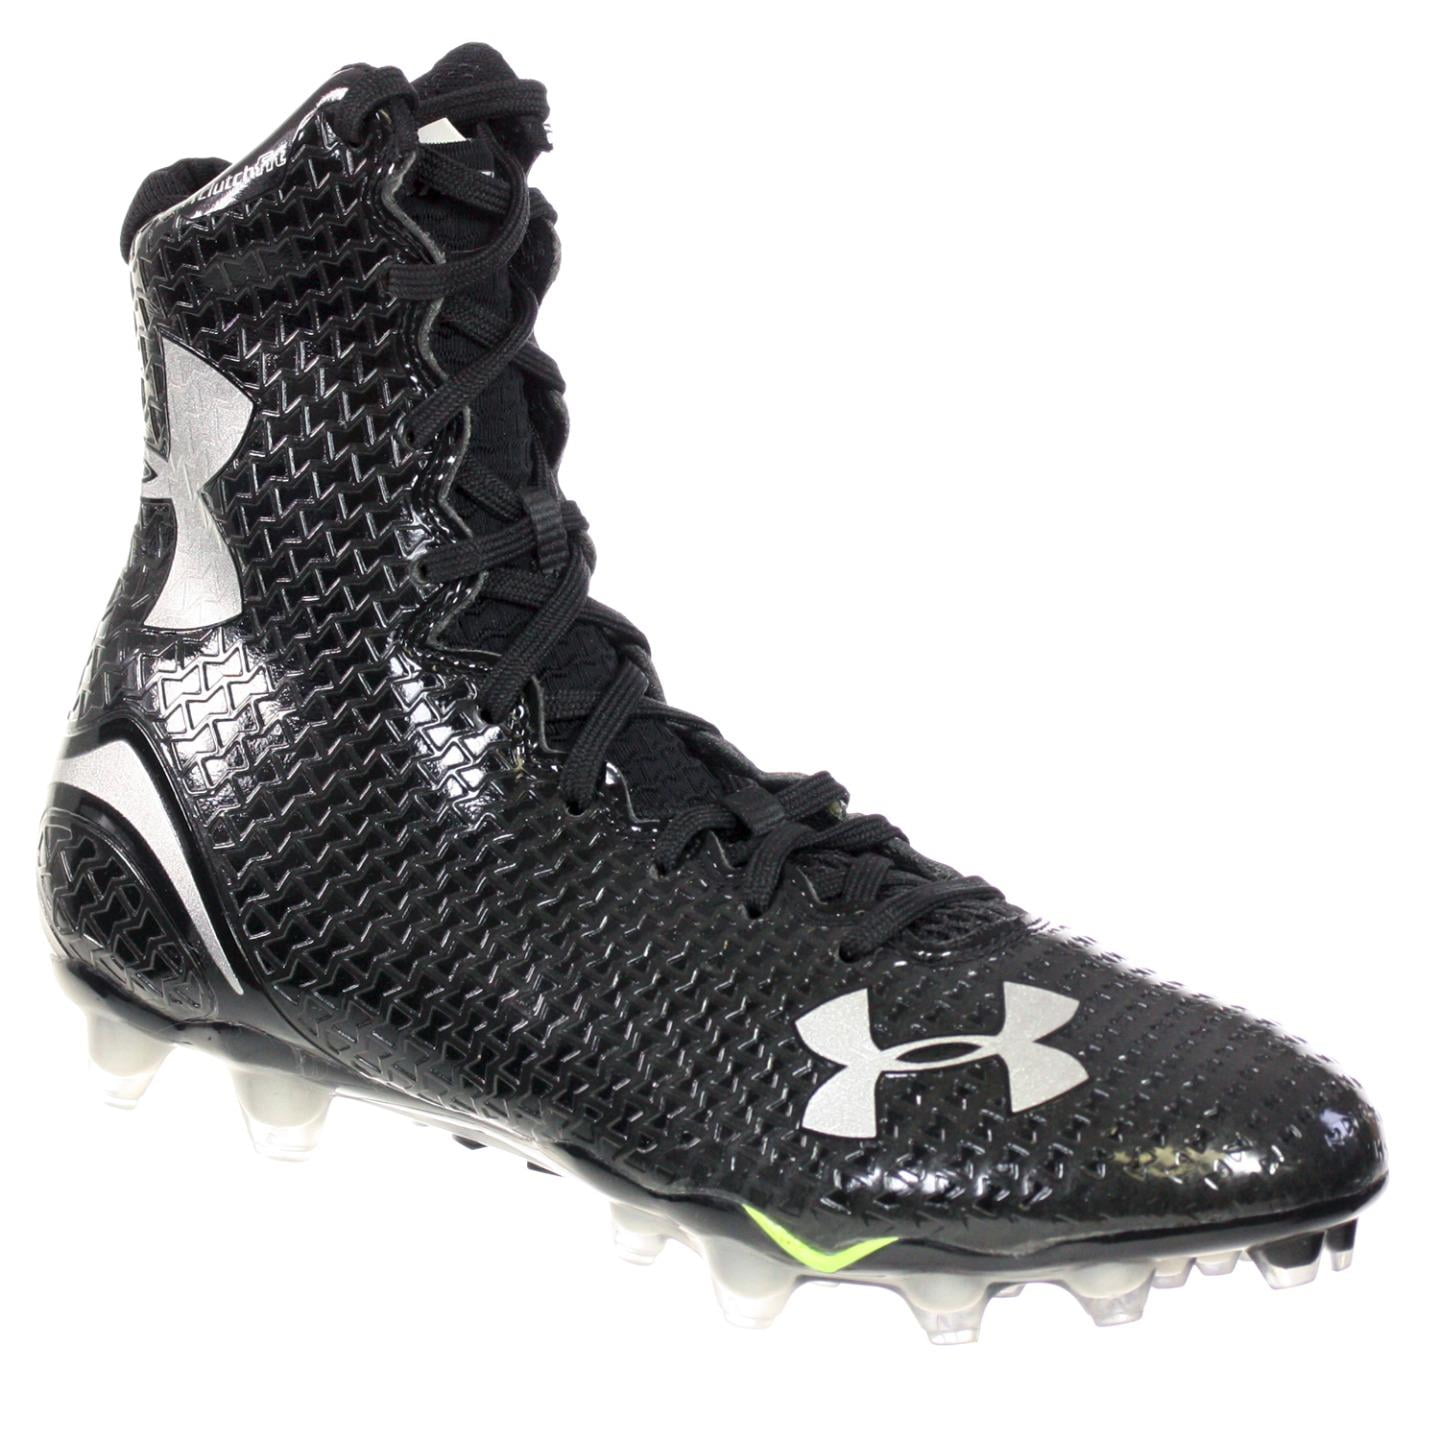 lime green under armour cleats